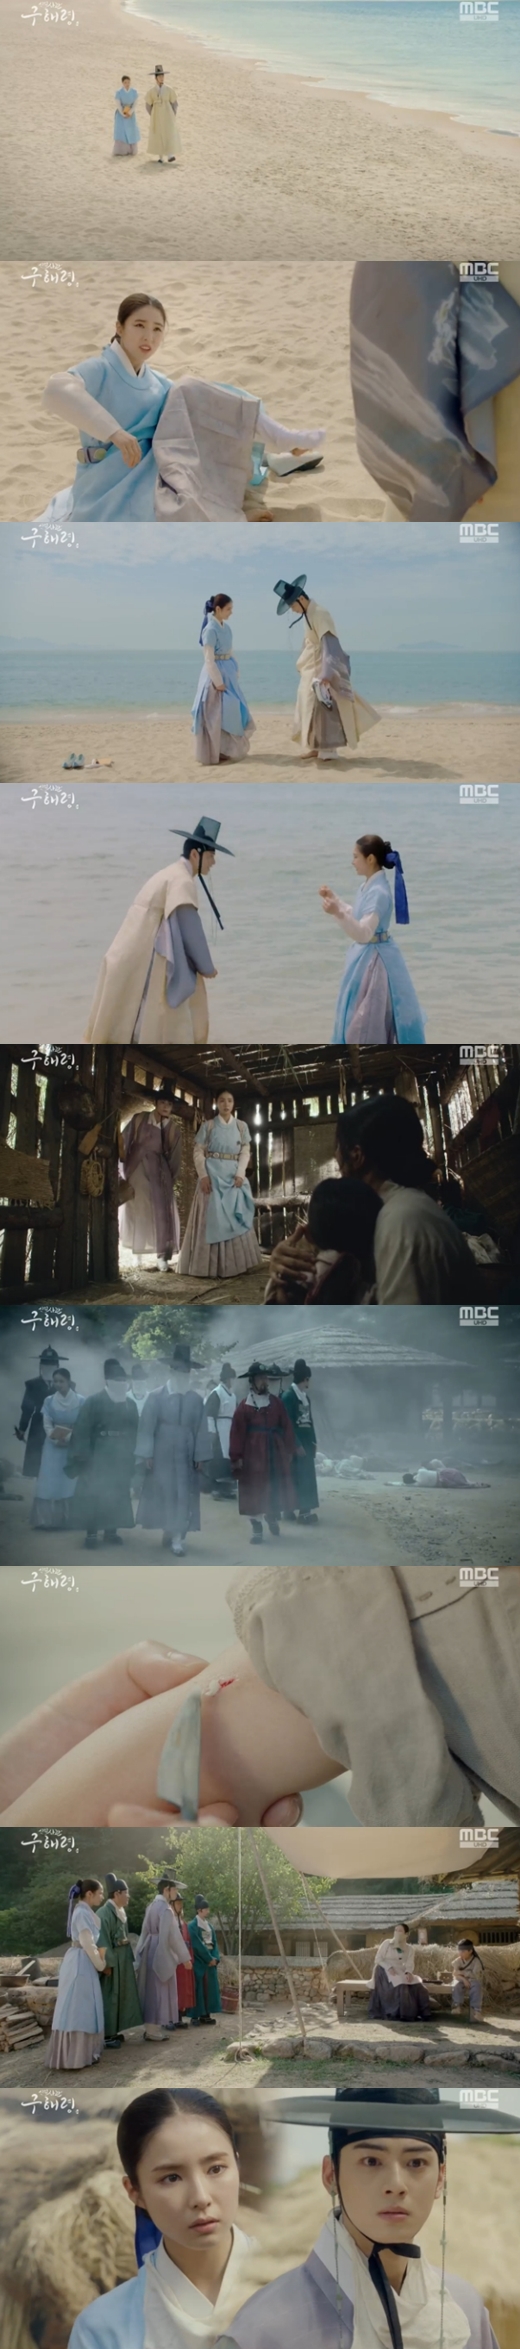 Lee Rim (Jung Eun-woo) and Koo Na Hae-ryung (Shin Se-kyung) enjoyed a beach date and thrilled viewers.In the 13th and 14th MBC drama Na Hae-ryung (played by Kim Ho-soo, directed by Kang Il-soo, Han Hyun-hee), which was broadcast on the 7th, Leerim and Na Hae-ryung, who visited the village where the plague was in full swing, were portrayed.As the plague spread and the people died, there was a rumor that the tax collector should be sent down to the police to settle the civil war.Lee Jin (Park Ki-woong) asked him to send him, but the king sent Lee Lim down to the place where the plague was turning, saying, You can read a book and light your face here and there.Na Hae-ryung, who heard this news, went along with Lee Lim, saying that he had suffered from a sore throat.Irim and Na Hae-ryung remained alone and spent a lot of time on the beach.Lee said, I wish I could see the sea for a long time, but I want someone to be around at this good moment.They had a good time, throwing off their bus lines and shoes, stepping on the sandy beach, and entering the sea water.One of the prestiges of Song Hwa-hyun, who said that he was a sage, asked Lee to save the people and die helplessly.Irim and Na Hae-ryung, who went out to look at it directly, felt terrible when they met their mother and son who were caught in a lungs while wandering through rough mountain roads.Lee and his colleagues then looked around the village where the plague was going, realizing the seriousness of the situation.In the last scene, one episode was concluded by witnessing a woman who left a head mark on the childs arm.